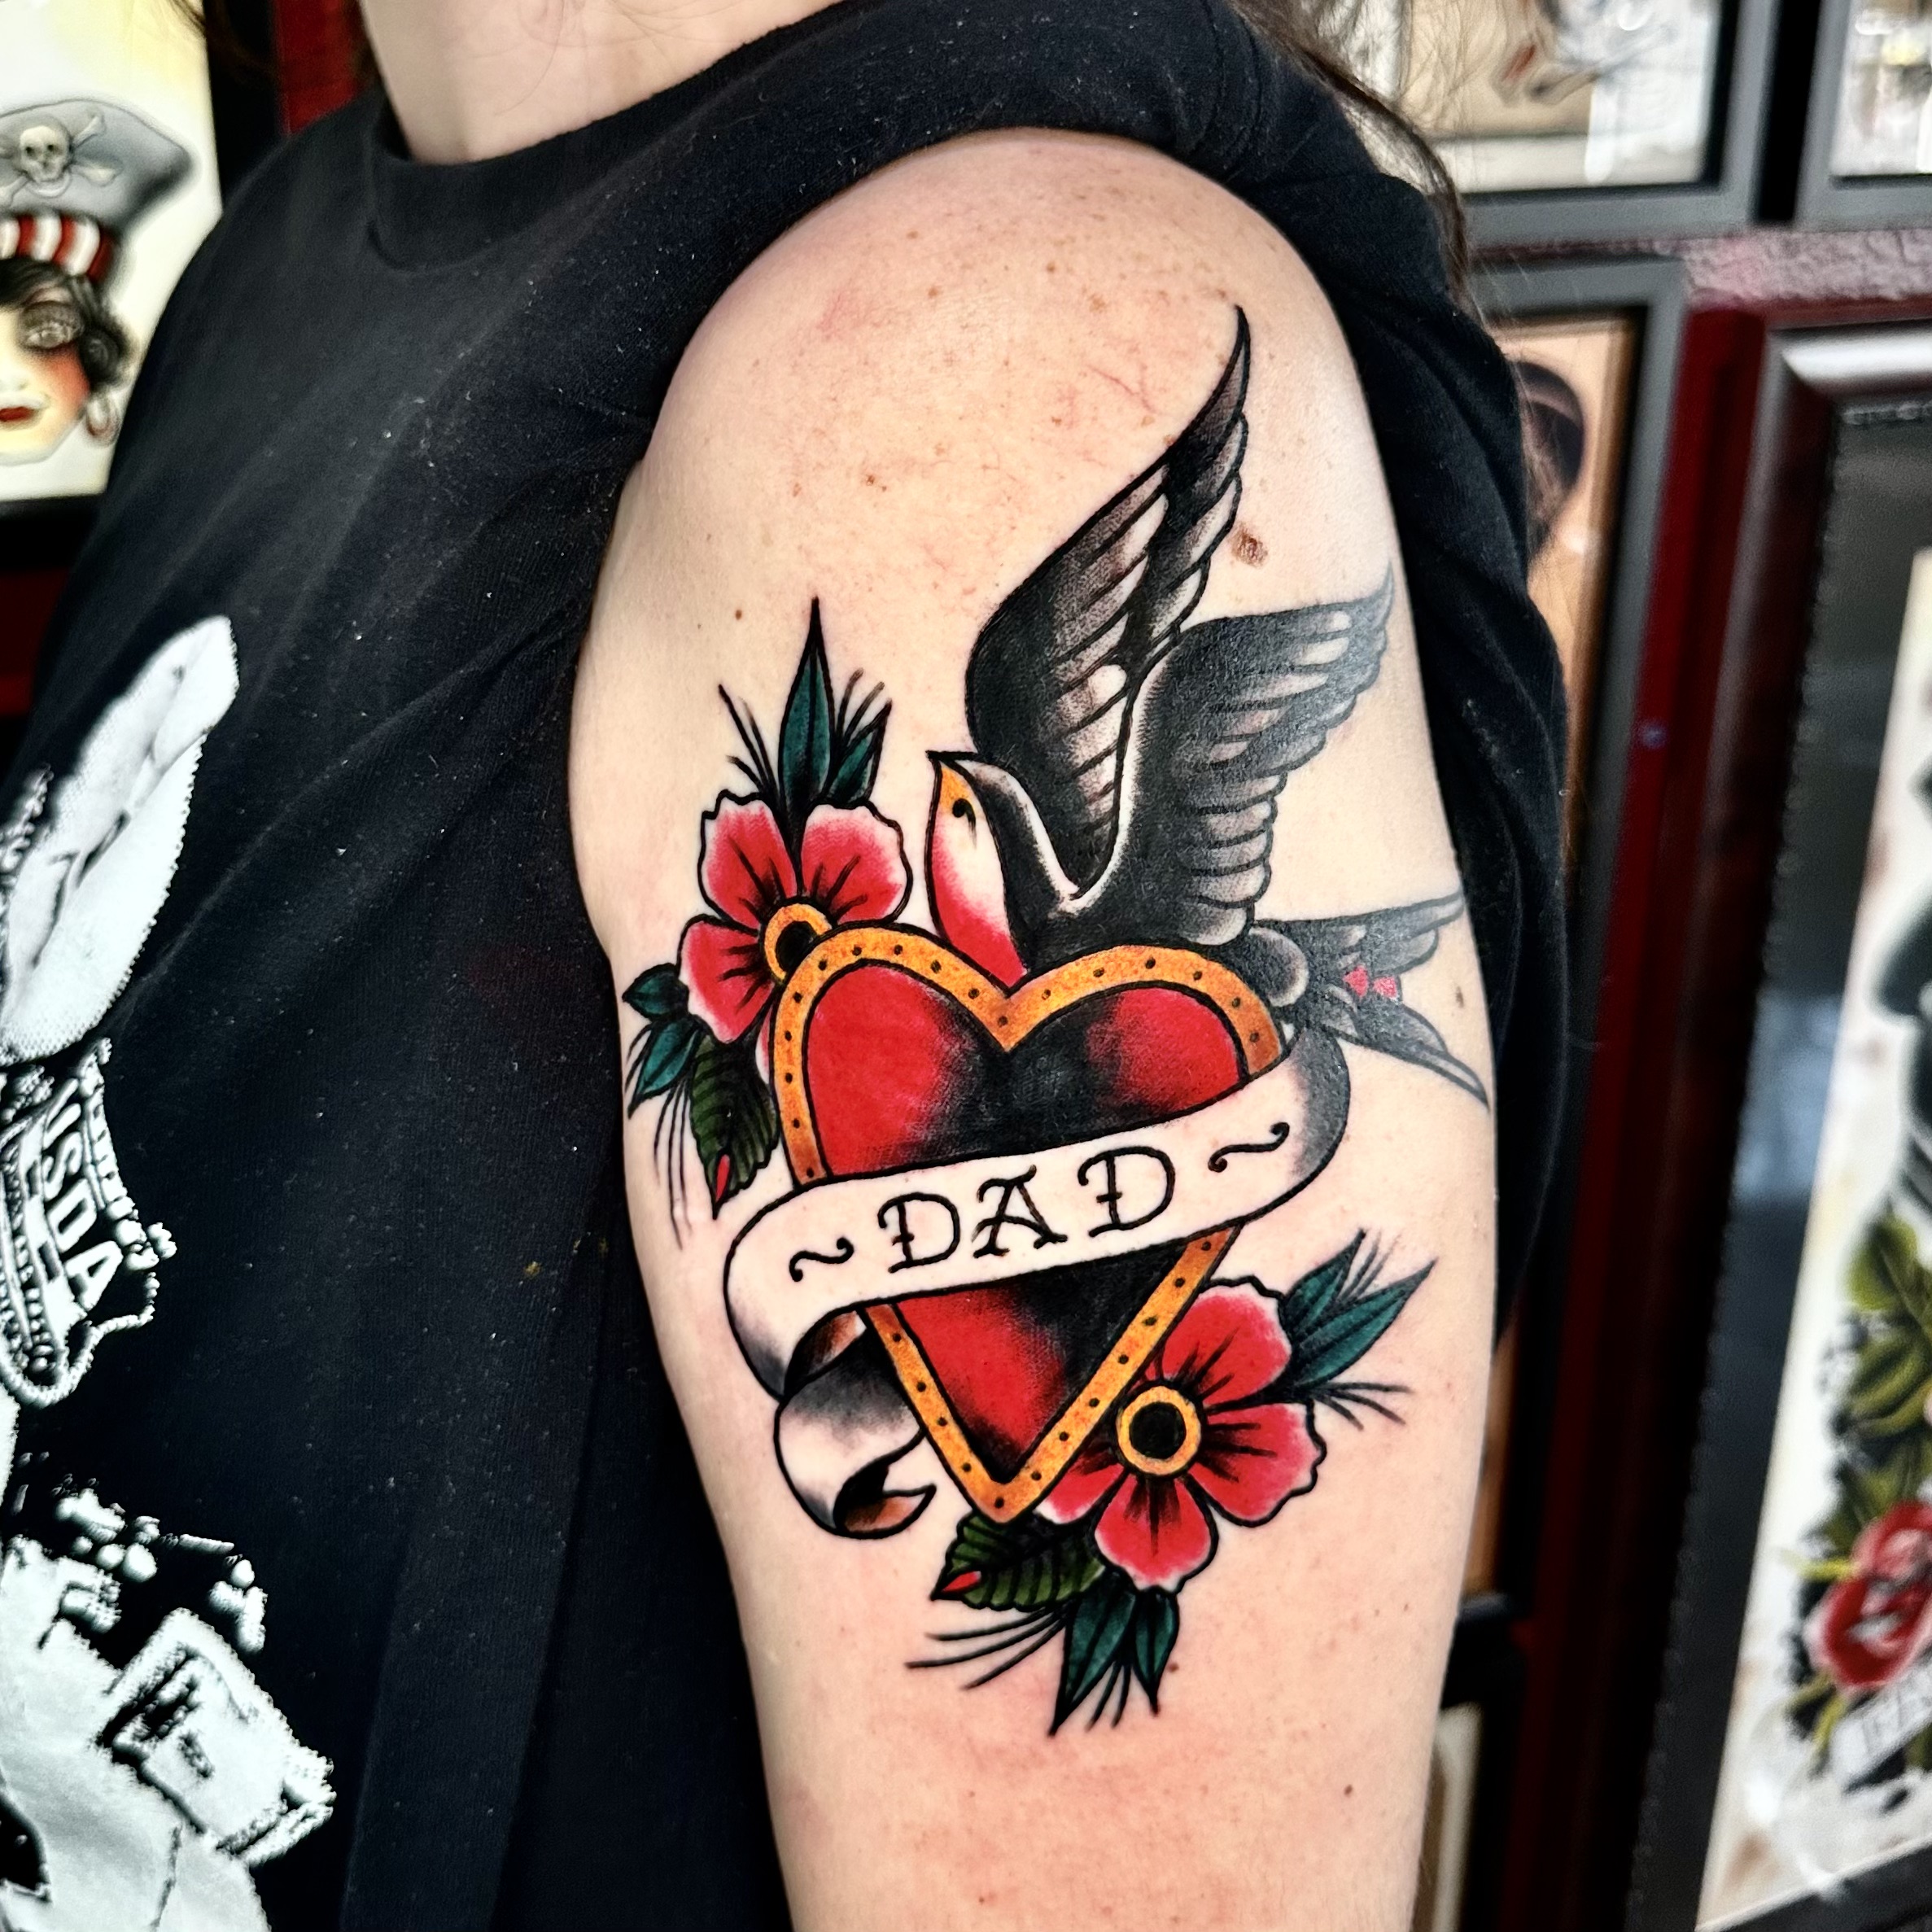 Tattoo of a heart with "dad" on it